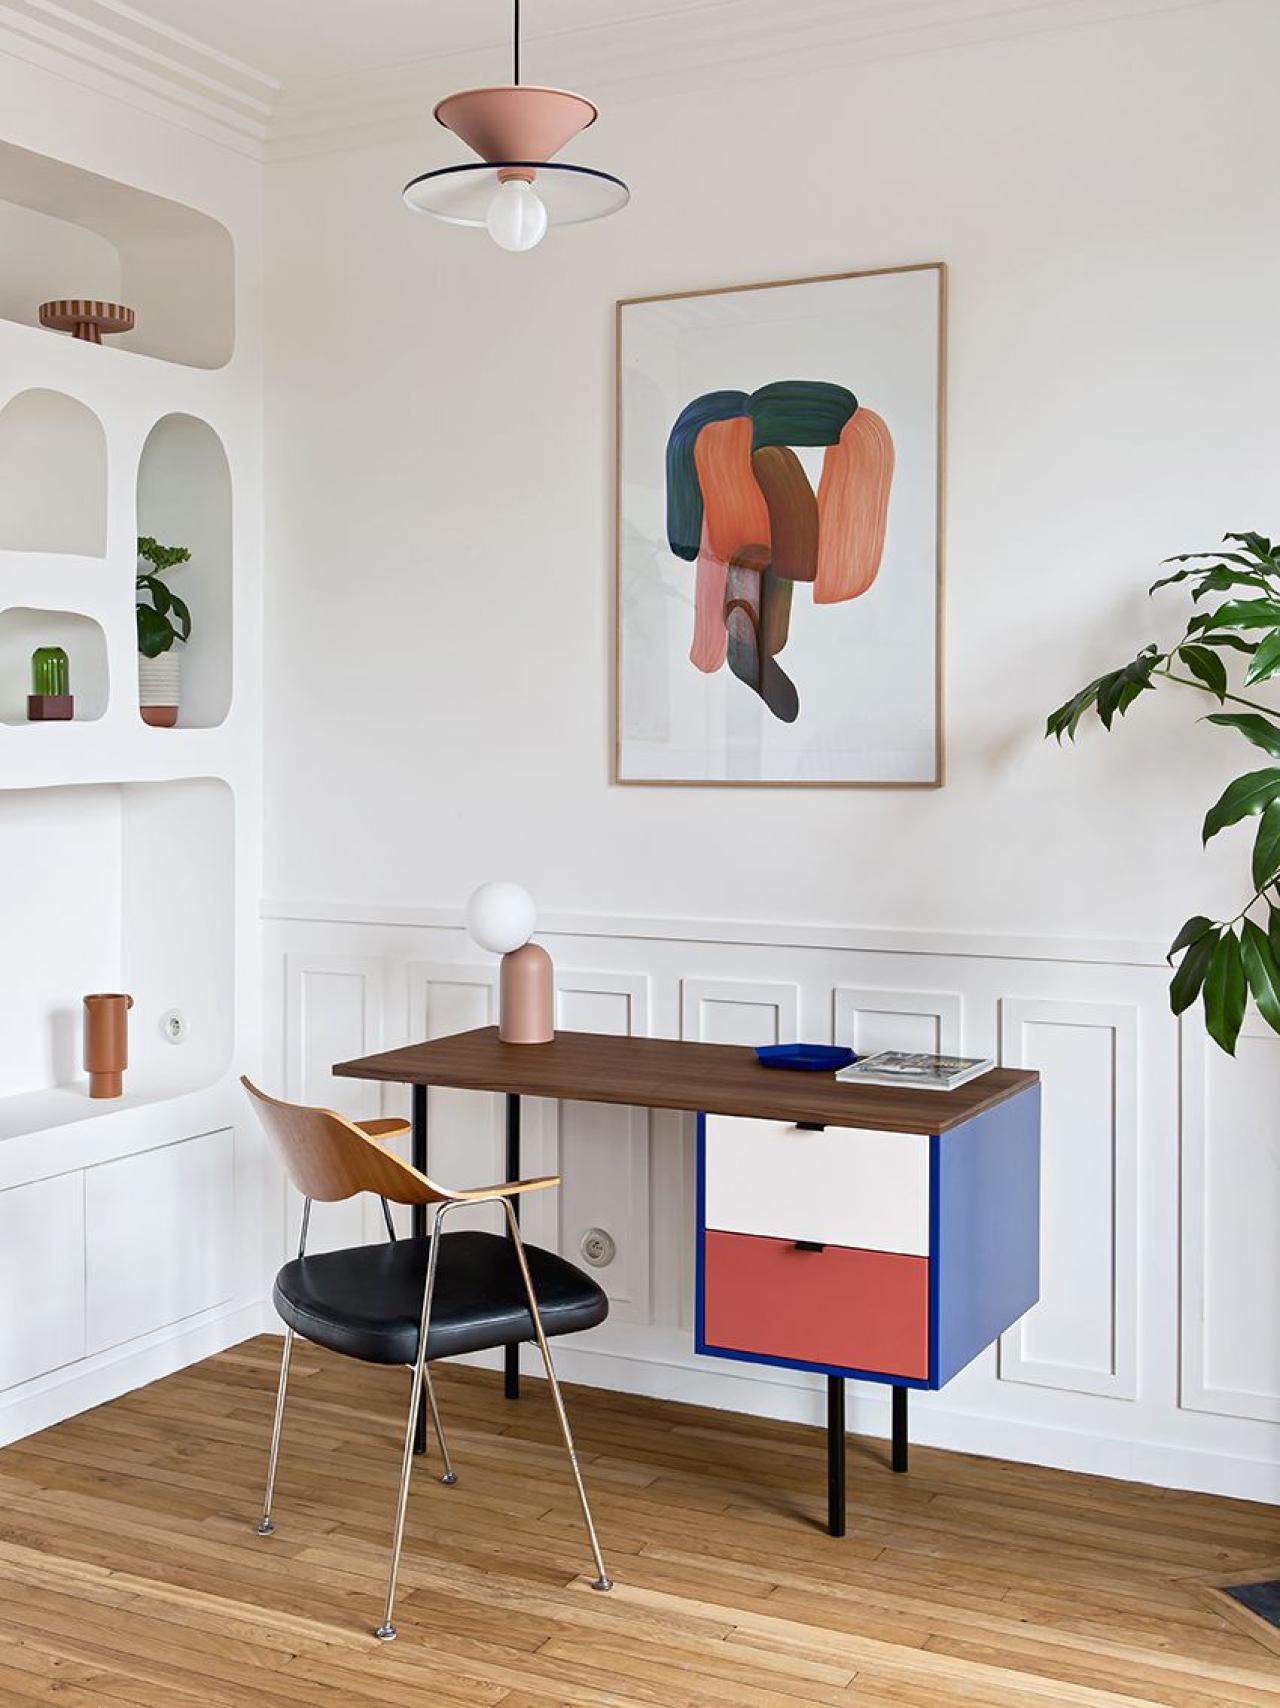 A small 50s inspired desk by Marn Déco